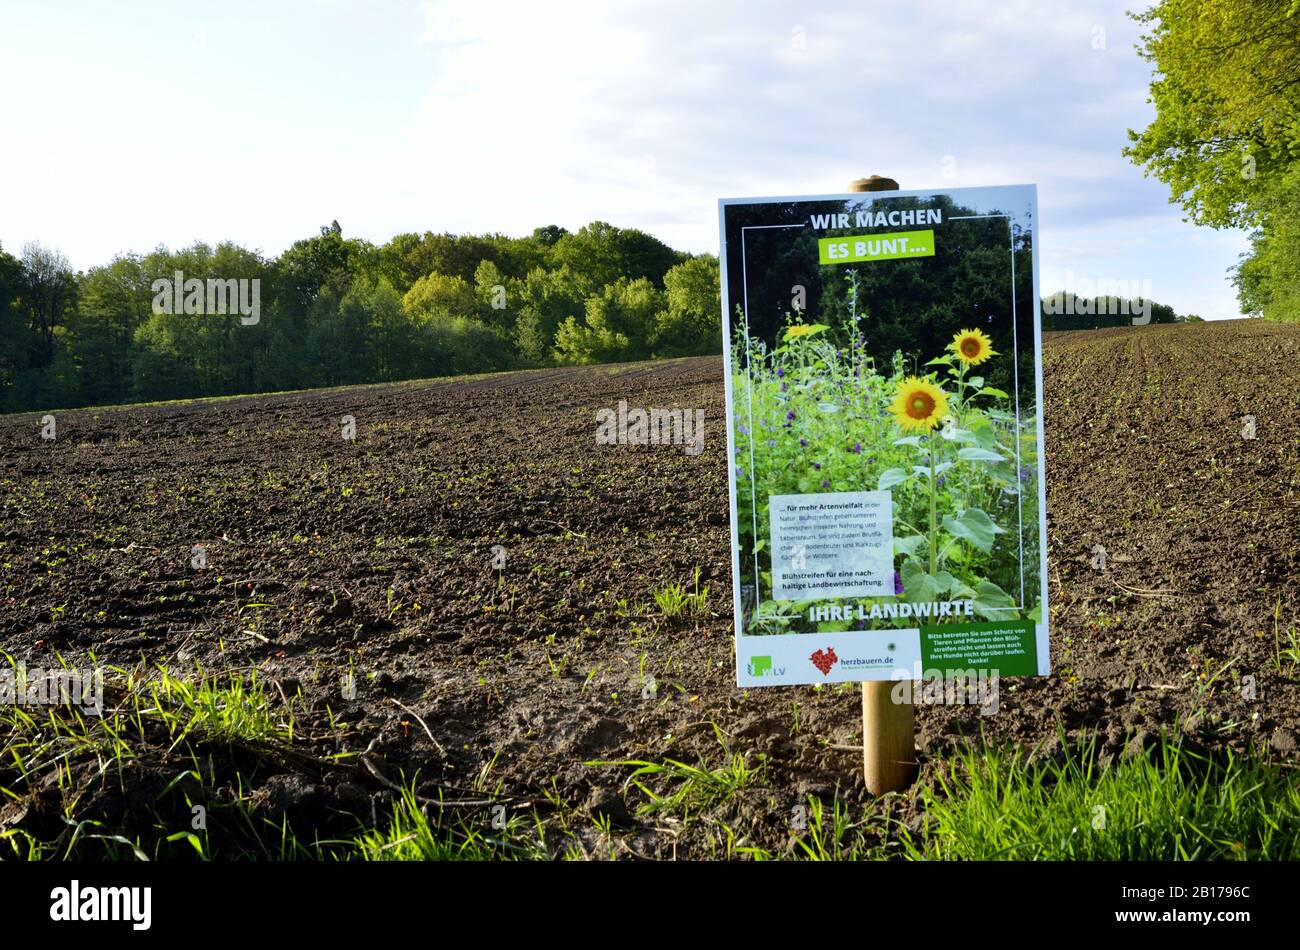 info sign about flower strips at the edge of an acre, Germany, North Rhine-Westphalia Stock Photo